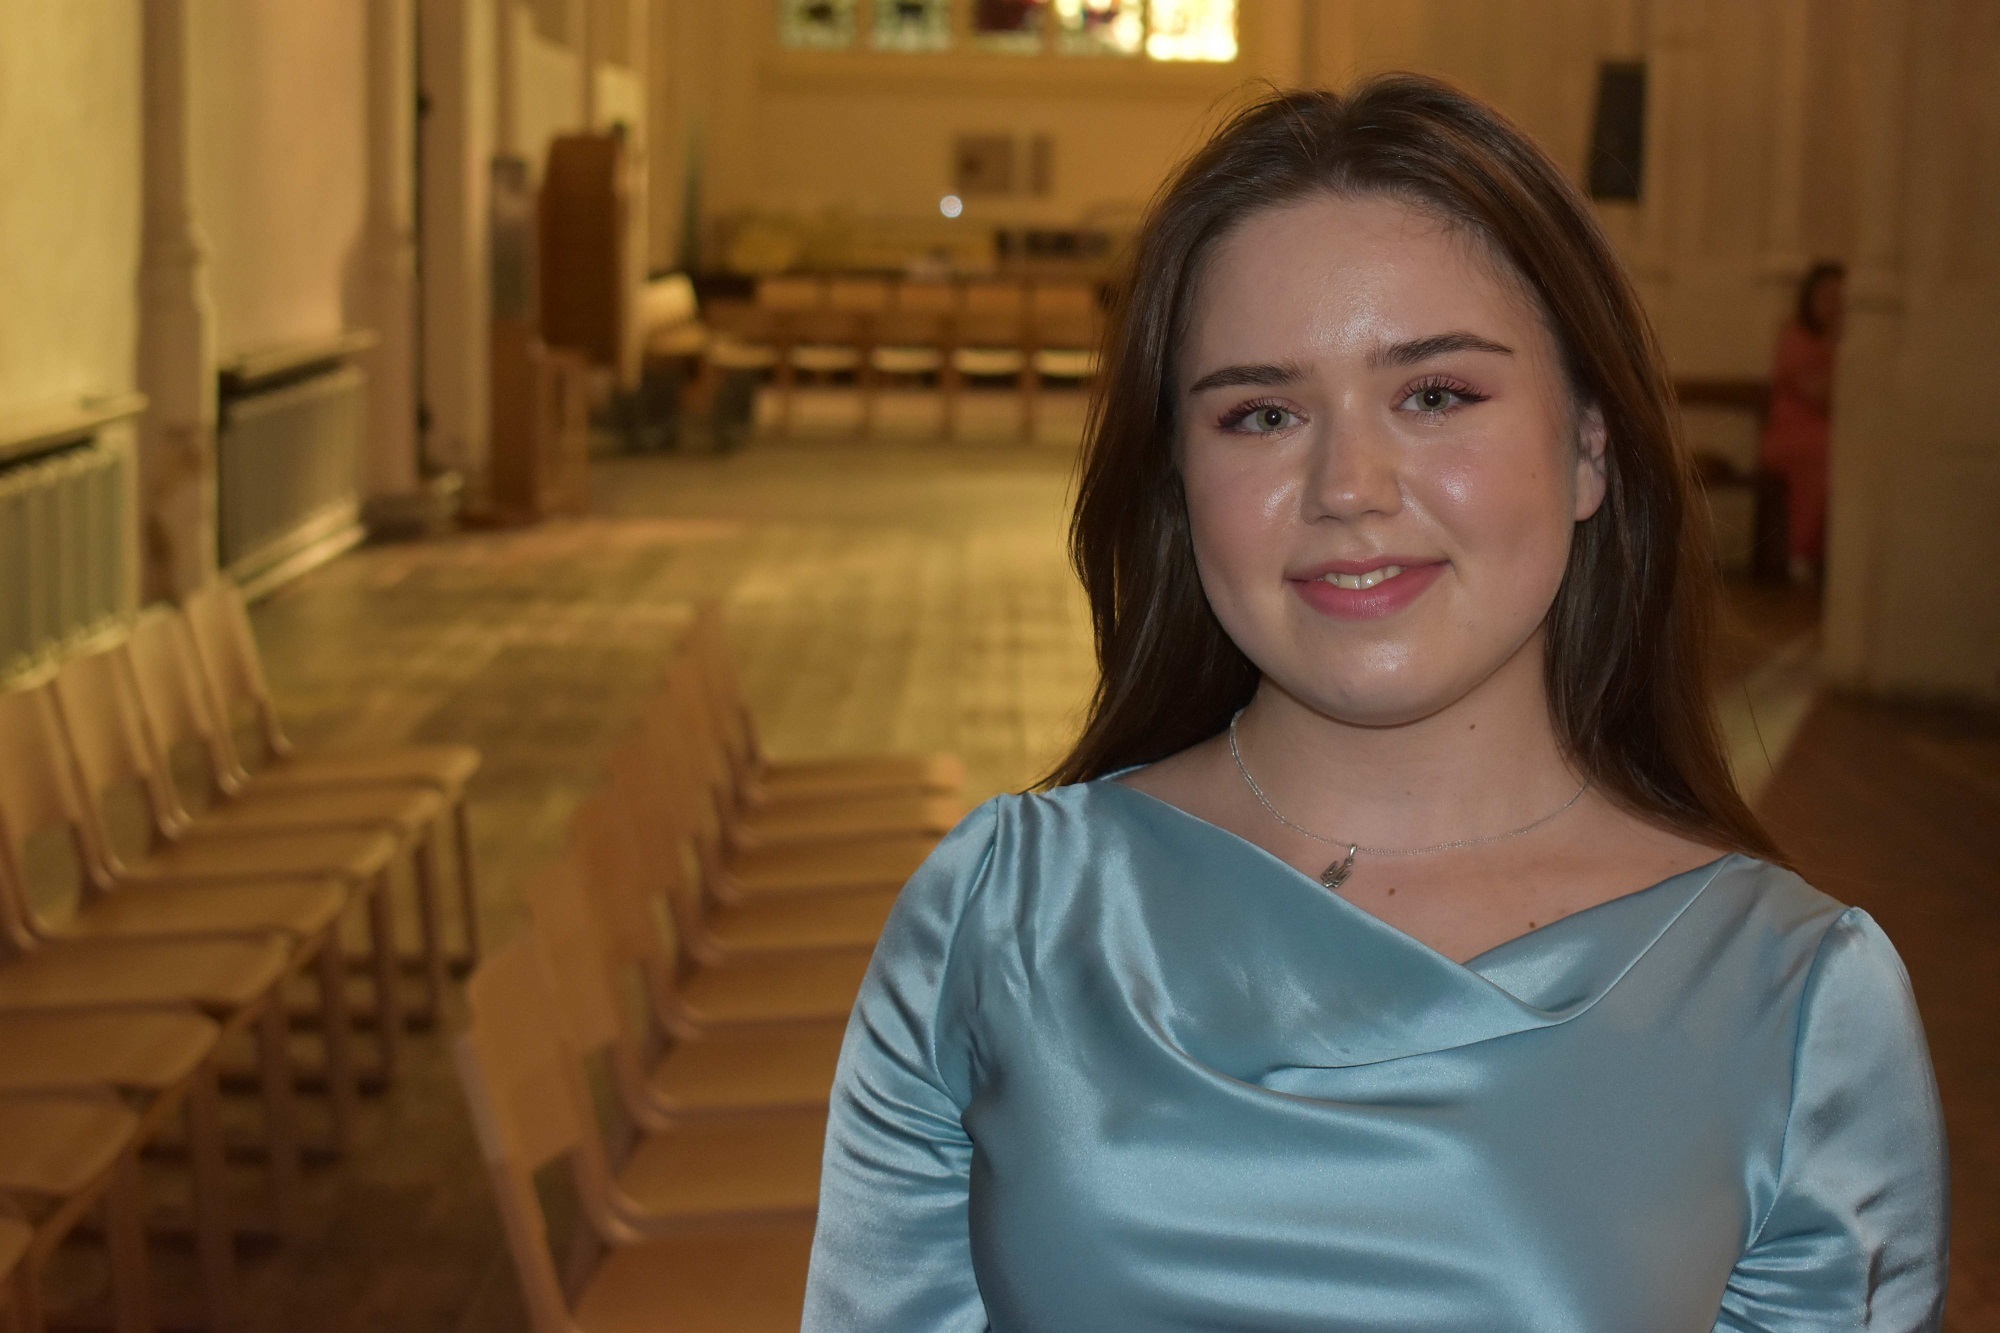 5Sofia Oksonenko from One Sixth Form College gained a remarkable student award at the Eastern Education Group's annual celebration of achievement